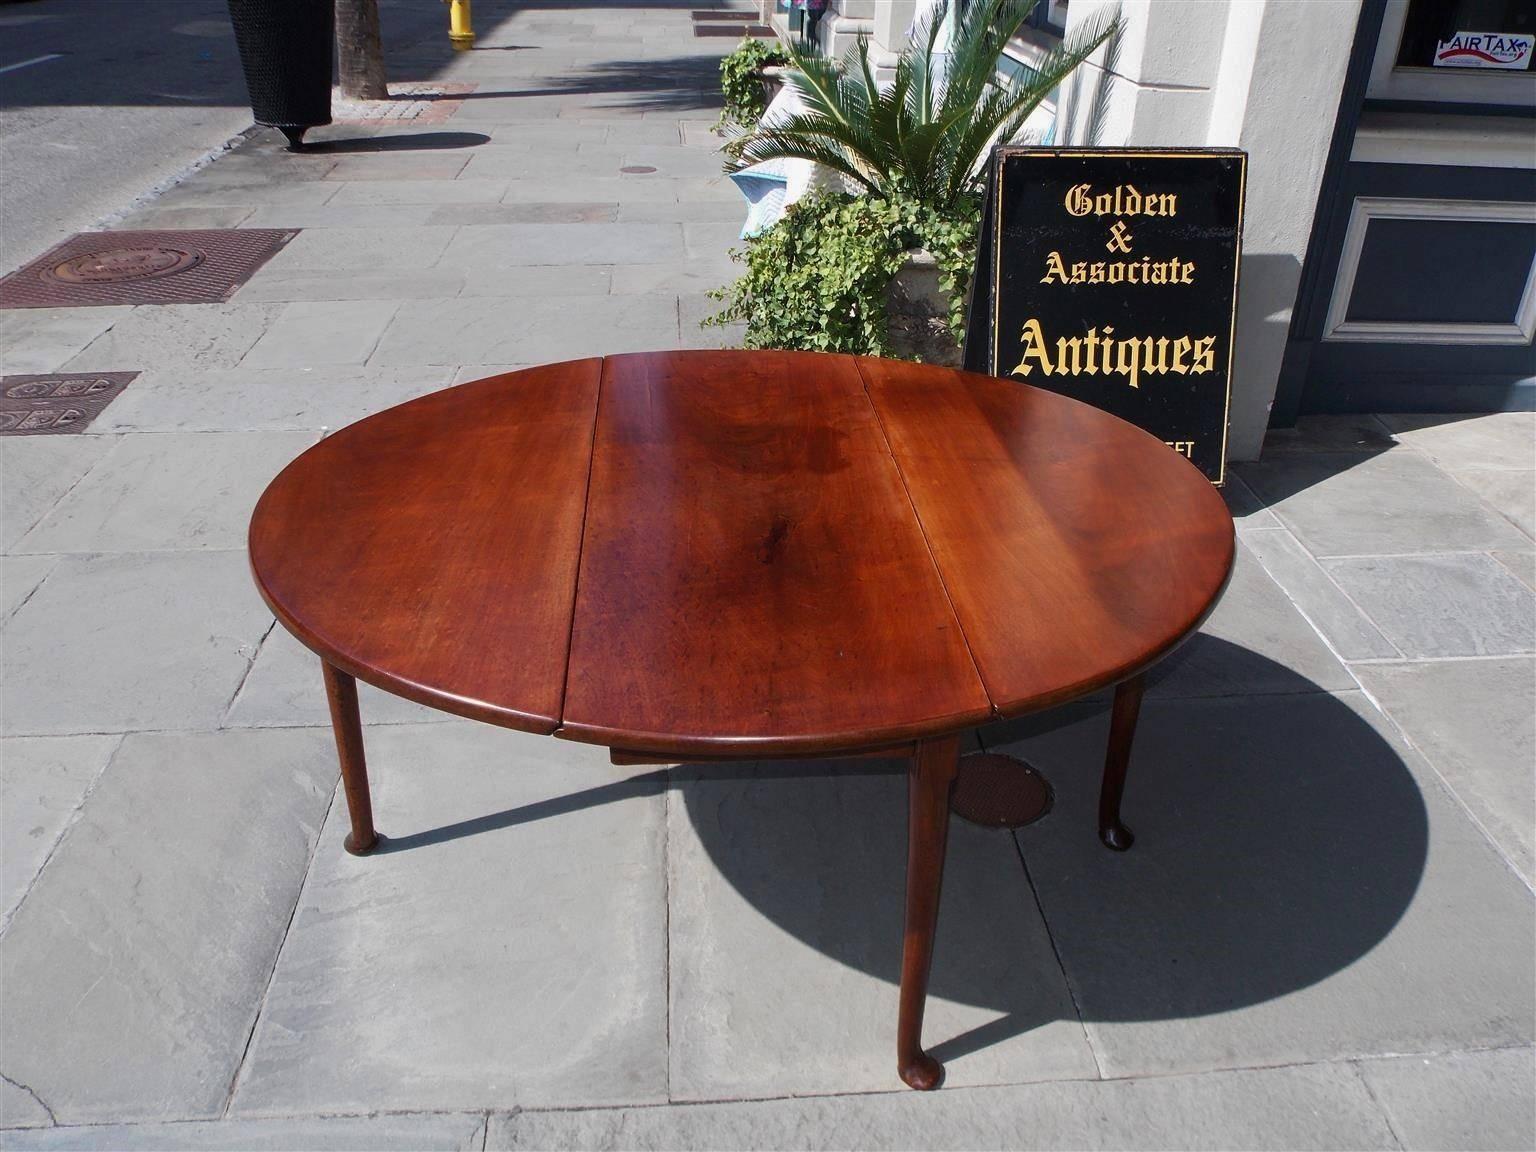 Mid-18th Century English Queen Anne Walnut Oval Drop-Leaf Table with Pad Feet, Circa 1740 For Sale